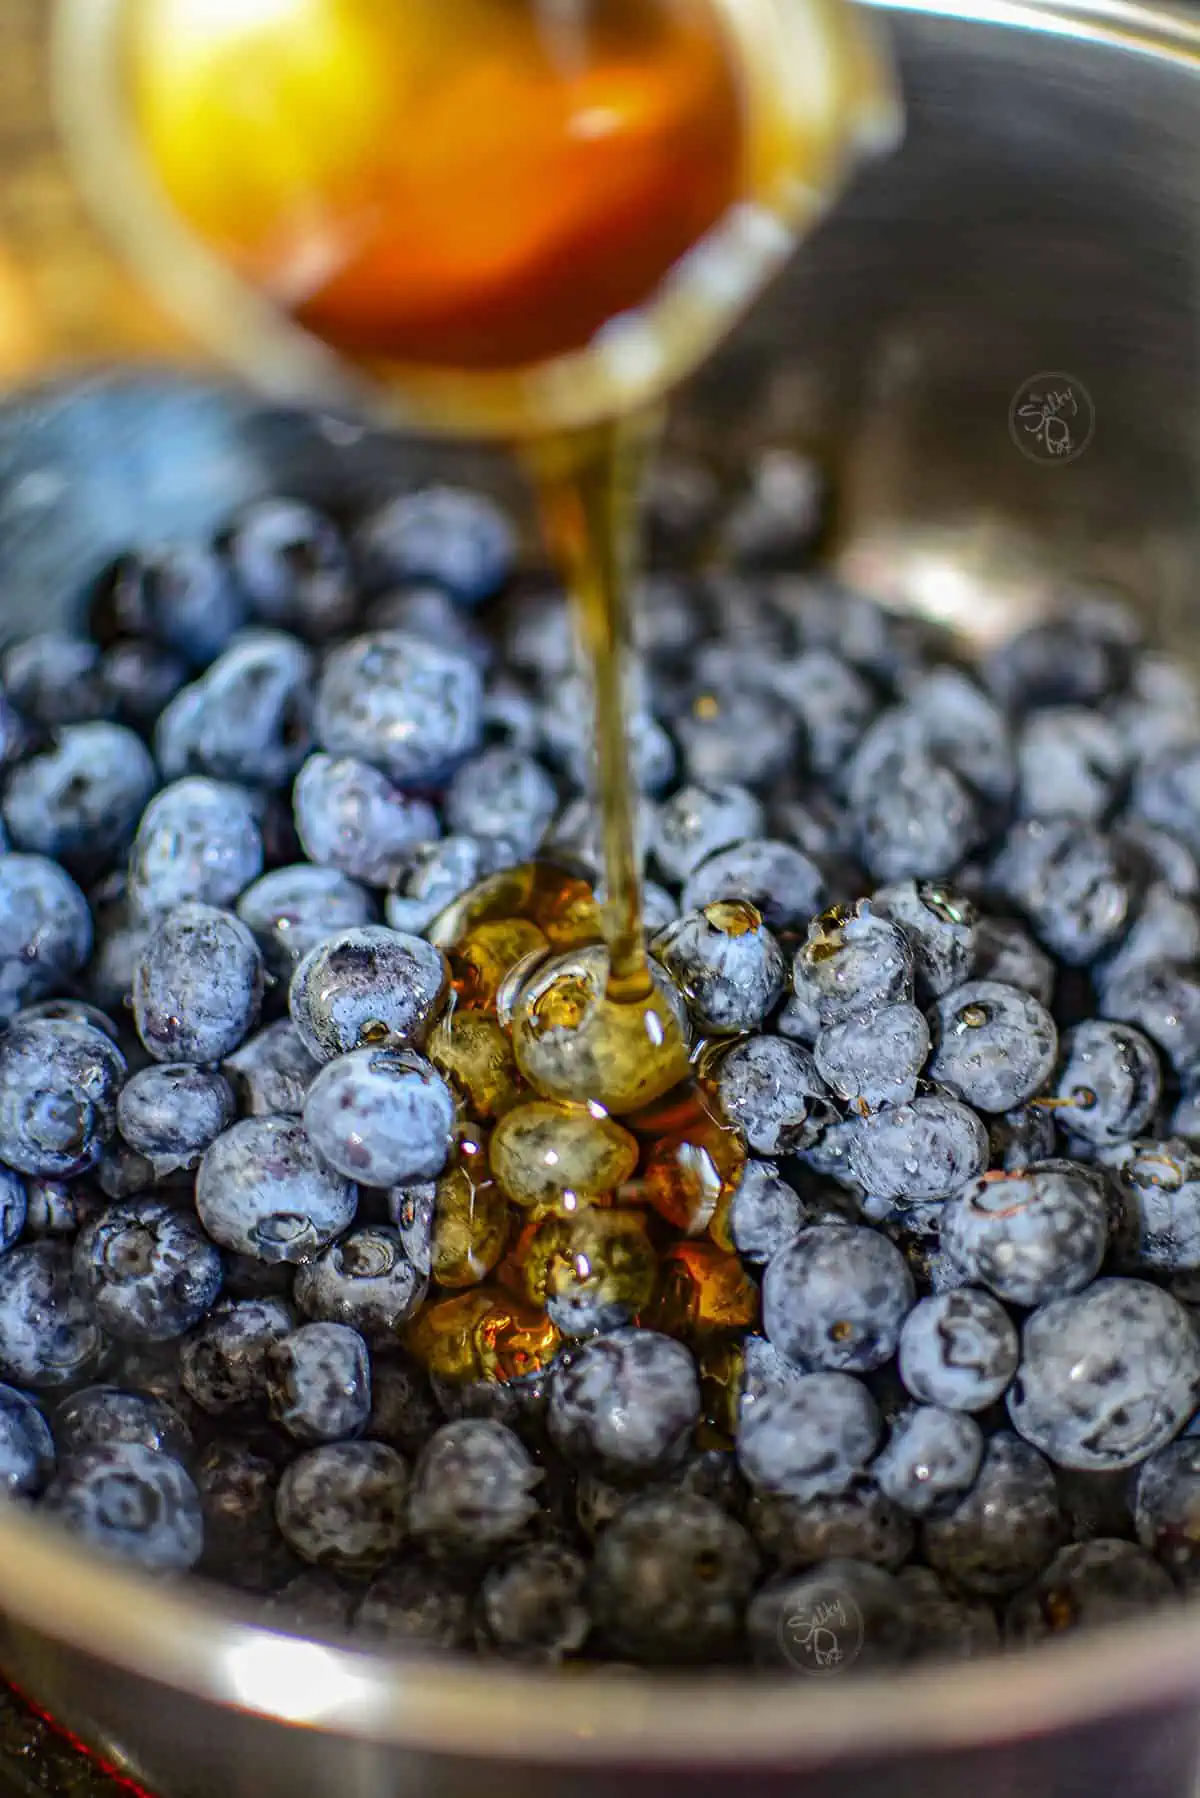 Pouring honey into the blueberries.